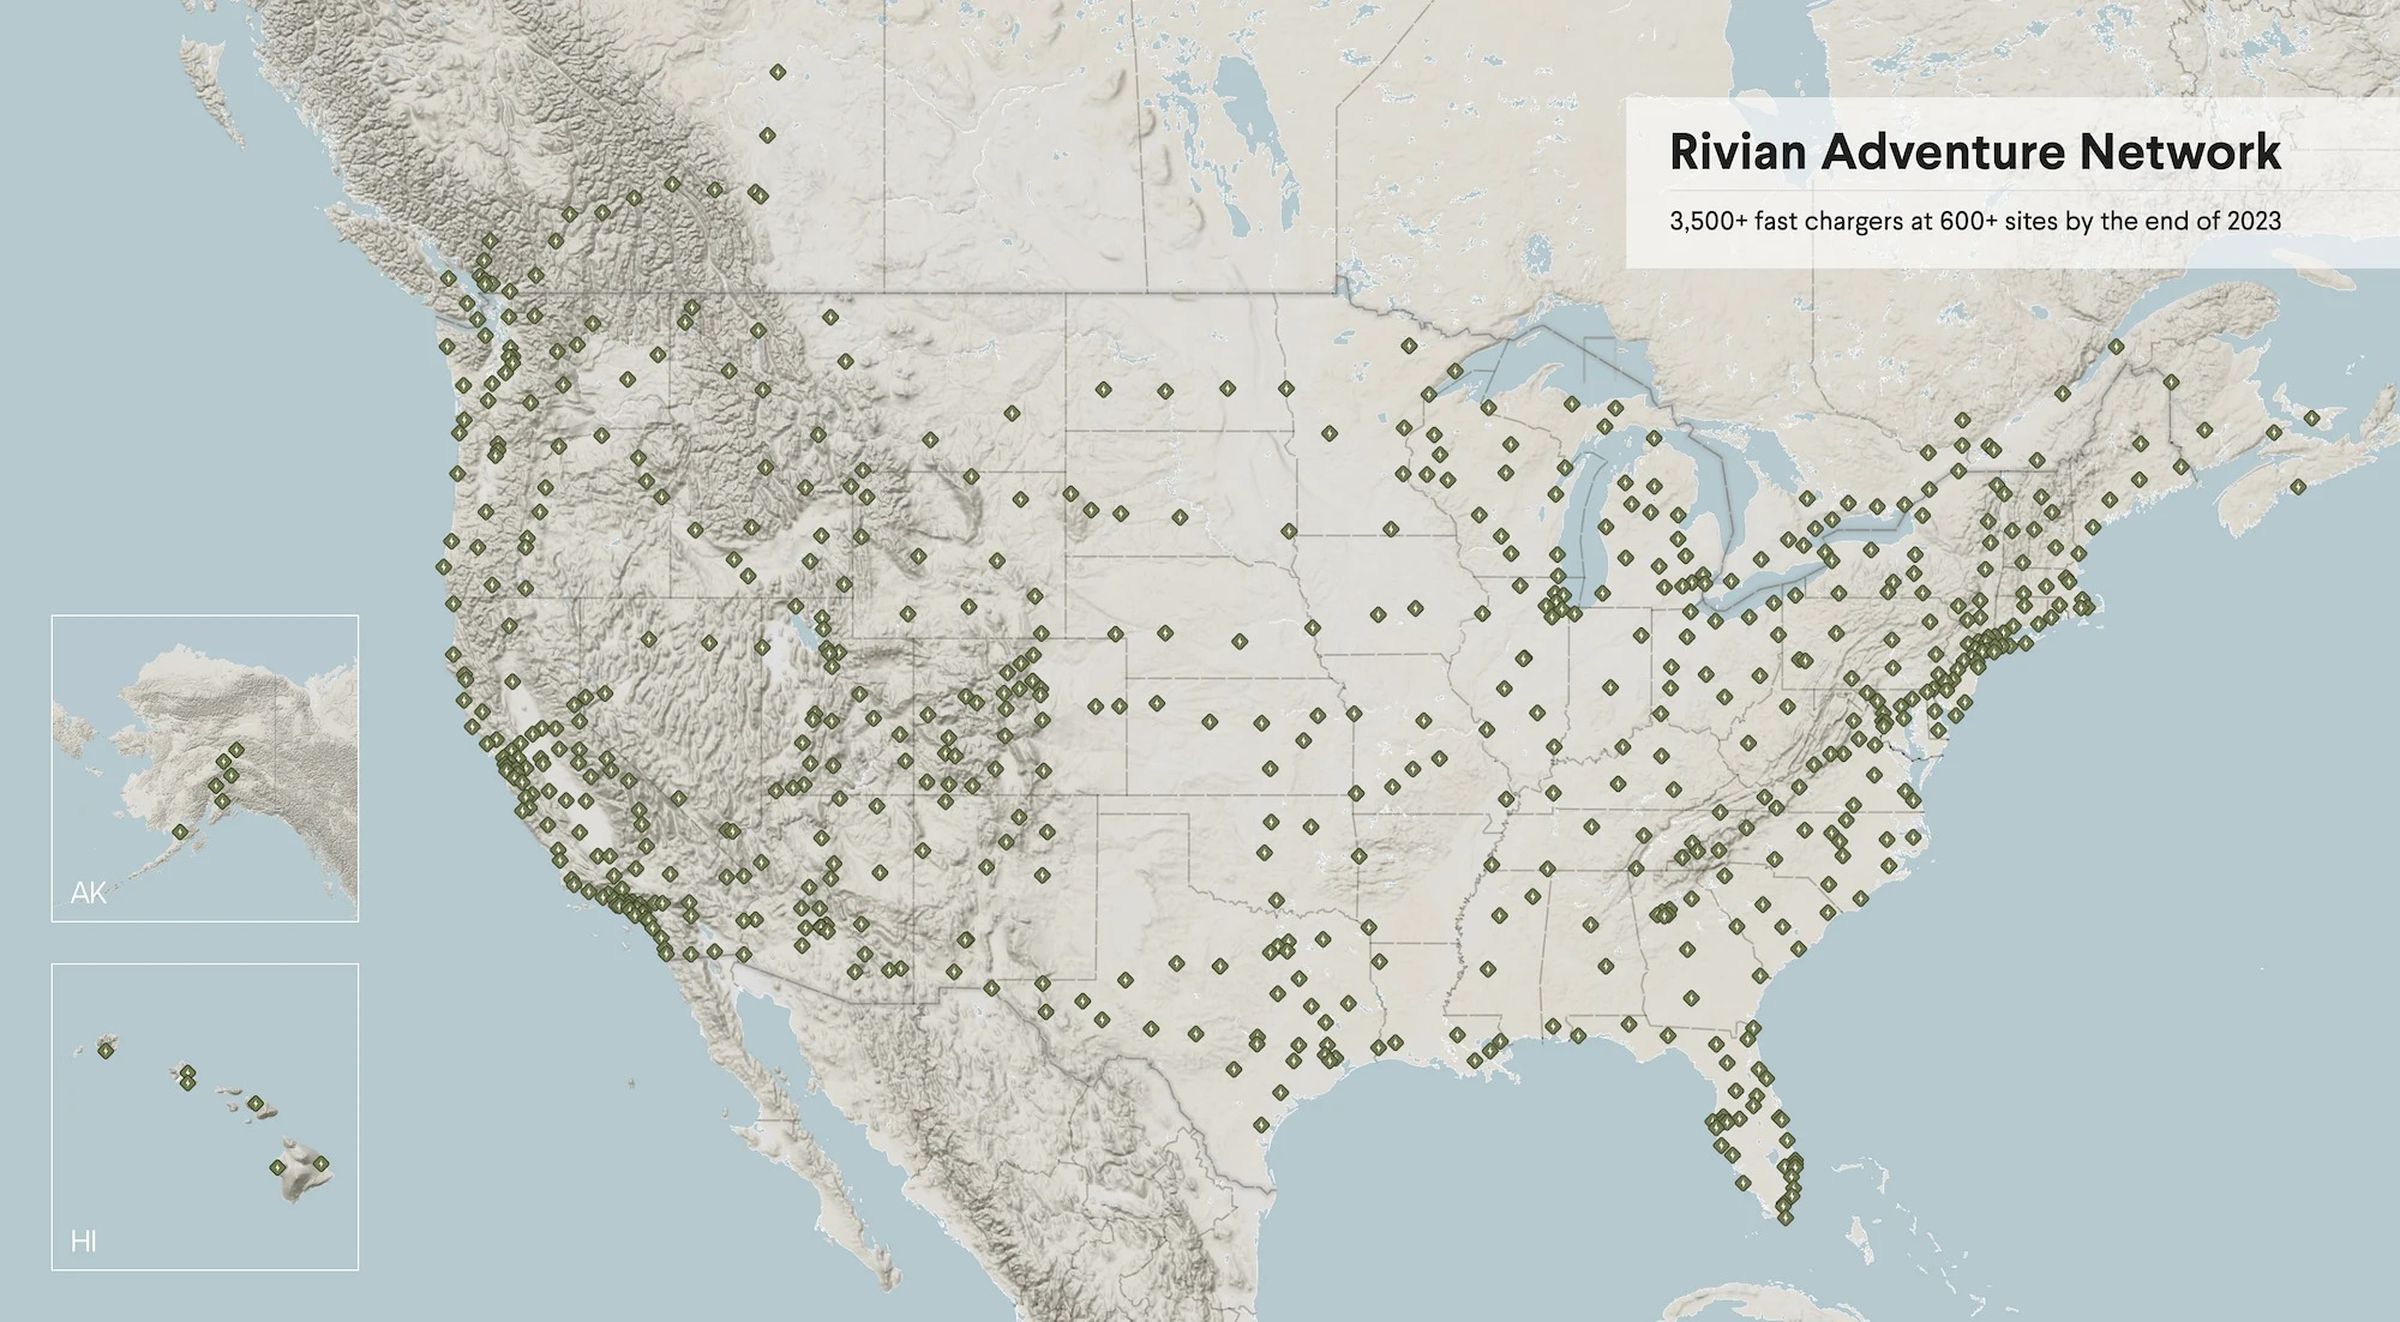 A map of the 3,500 fast chargers Rivian is planning at 600 sites